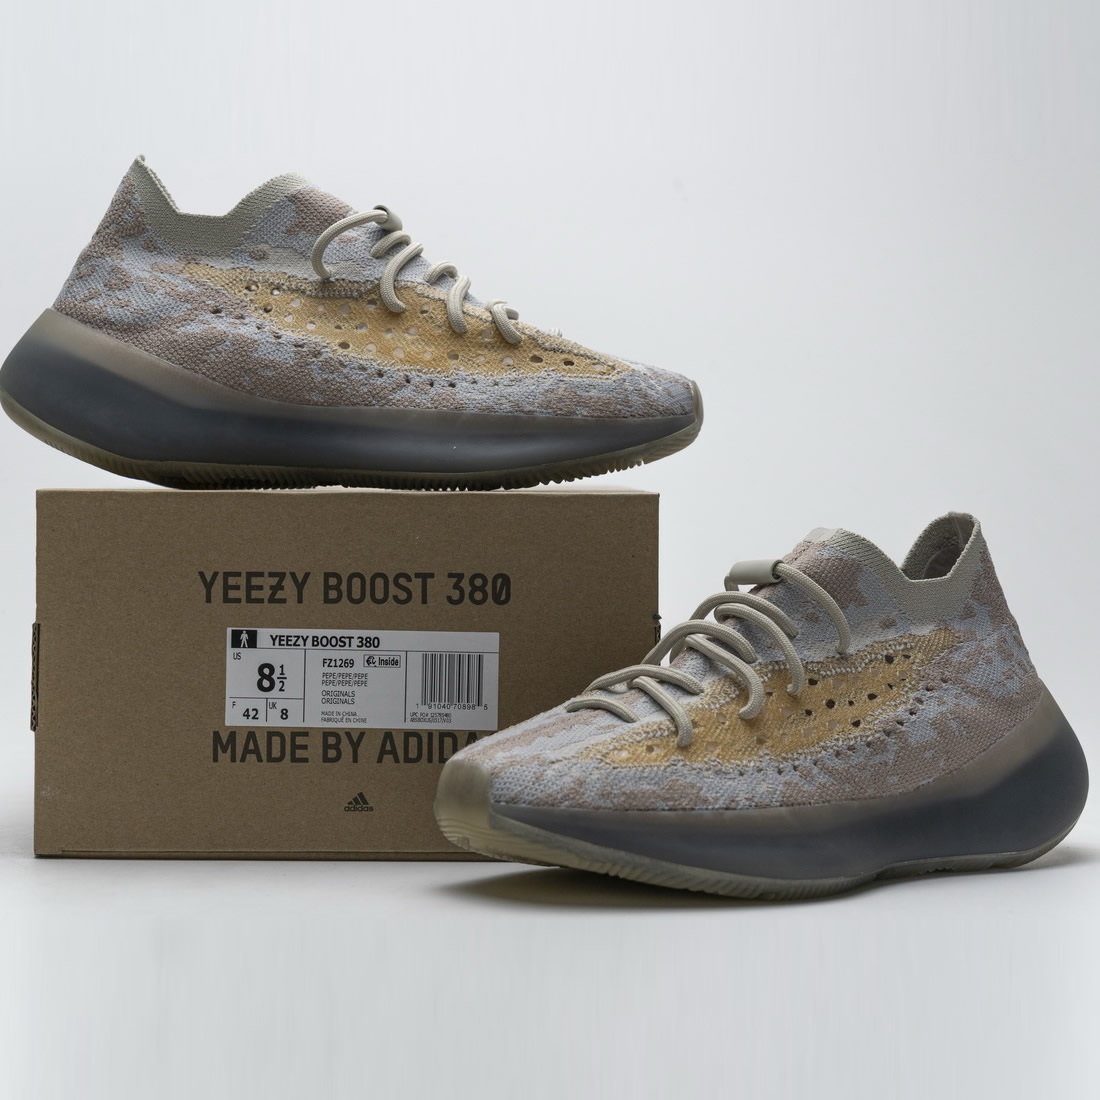 Adidas Yeezy Boost 380 Pepper Non Reflective Fz1269 New Release Date For Sale 5 - www.kickbulk.org